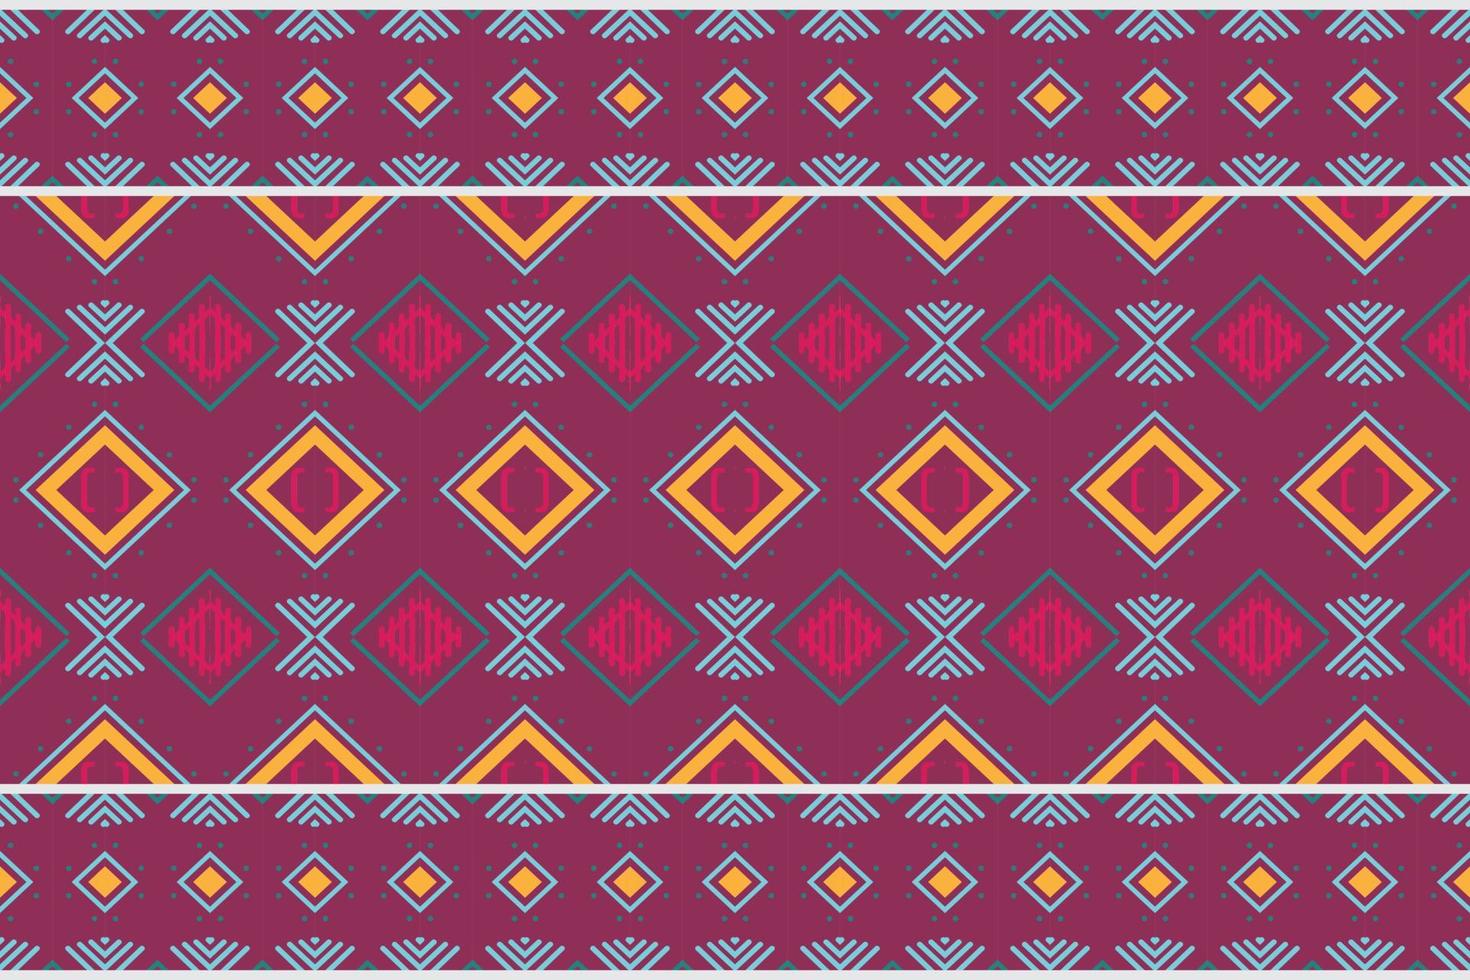 Ethnic texture tribal chevron Geometric Traditional ethnic oriental design for the background. Folk embroidery, Indian, Scandinavian, Gypsy, Mexican, African rug, carpet. vector